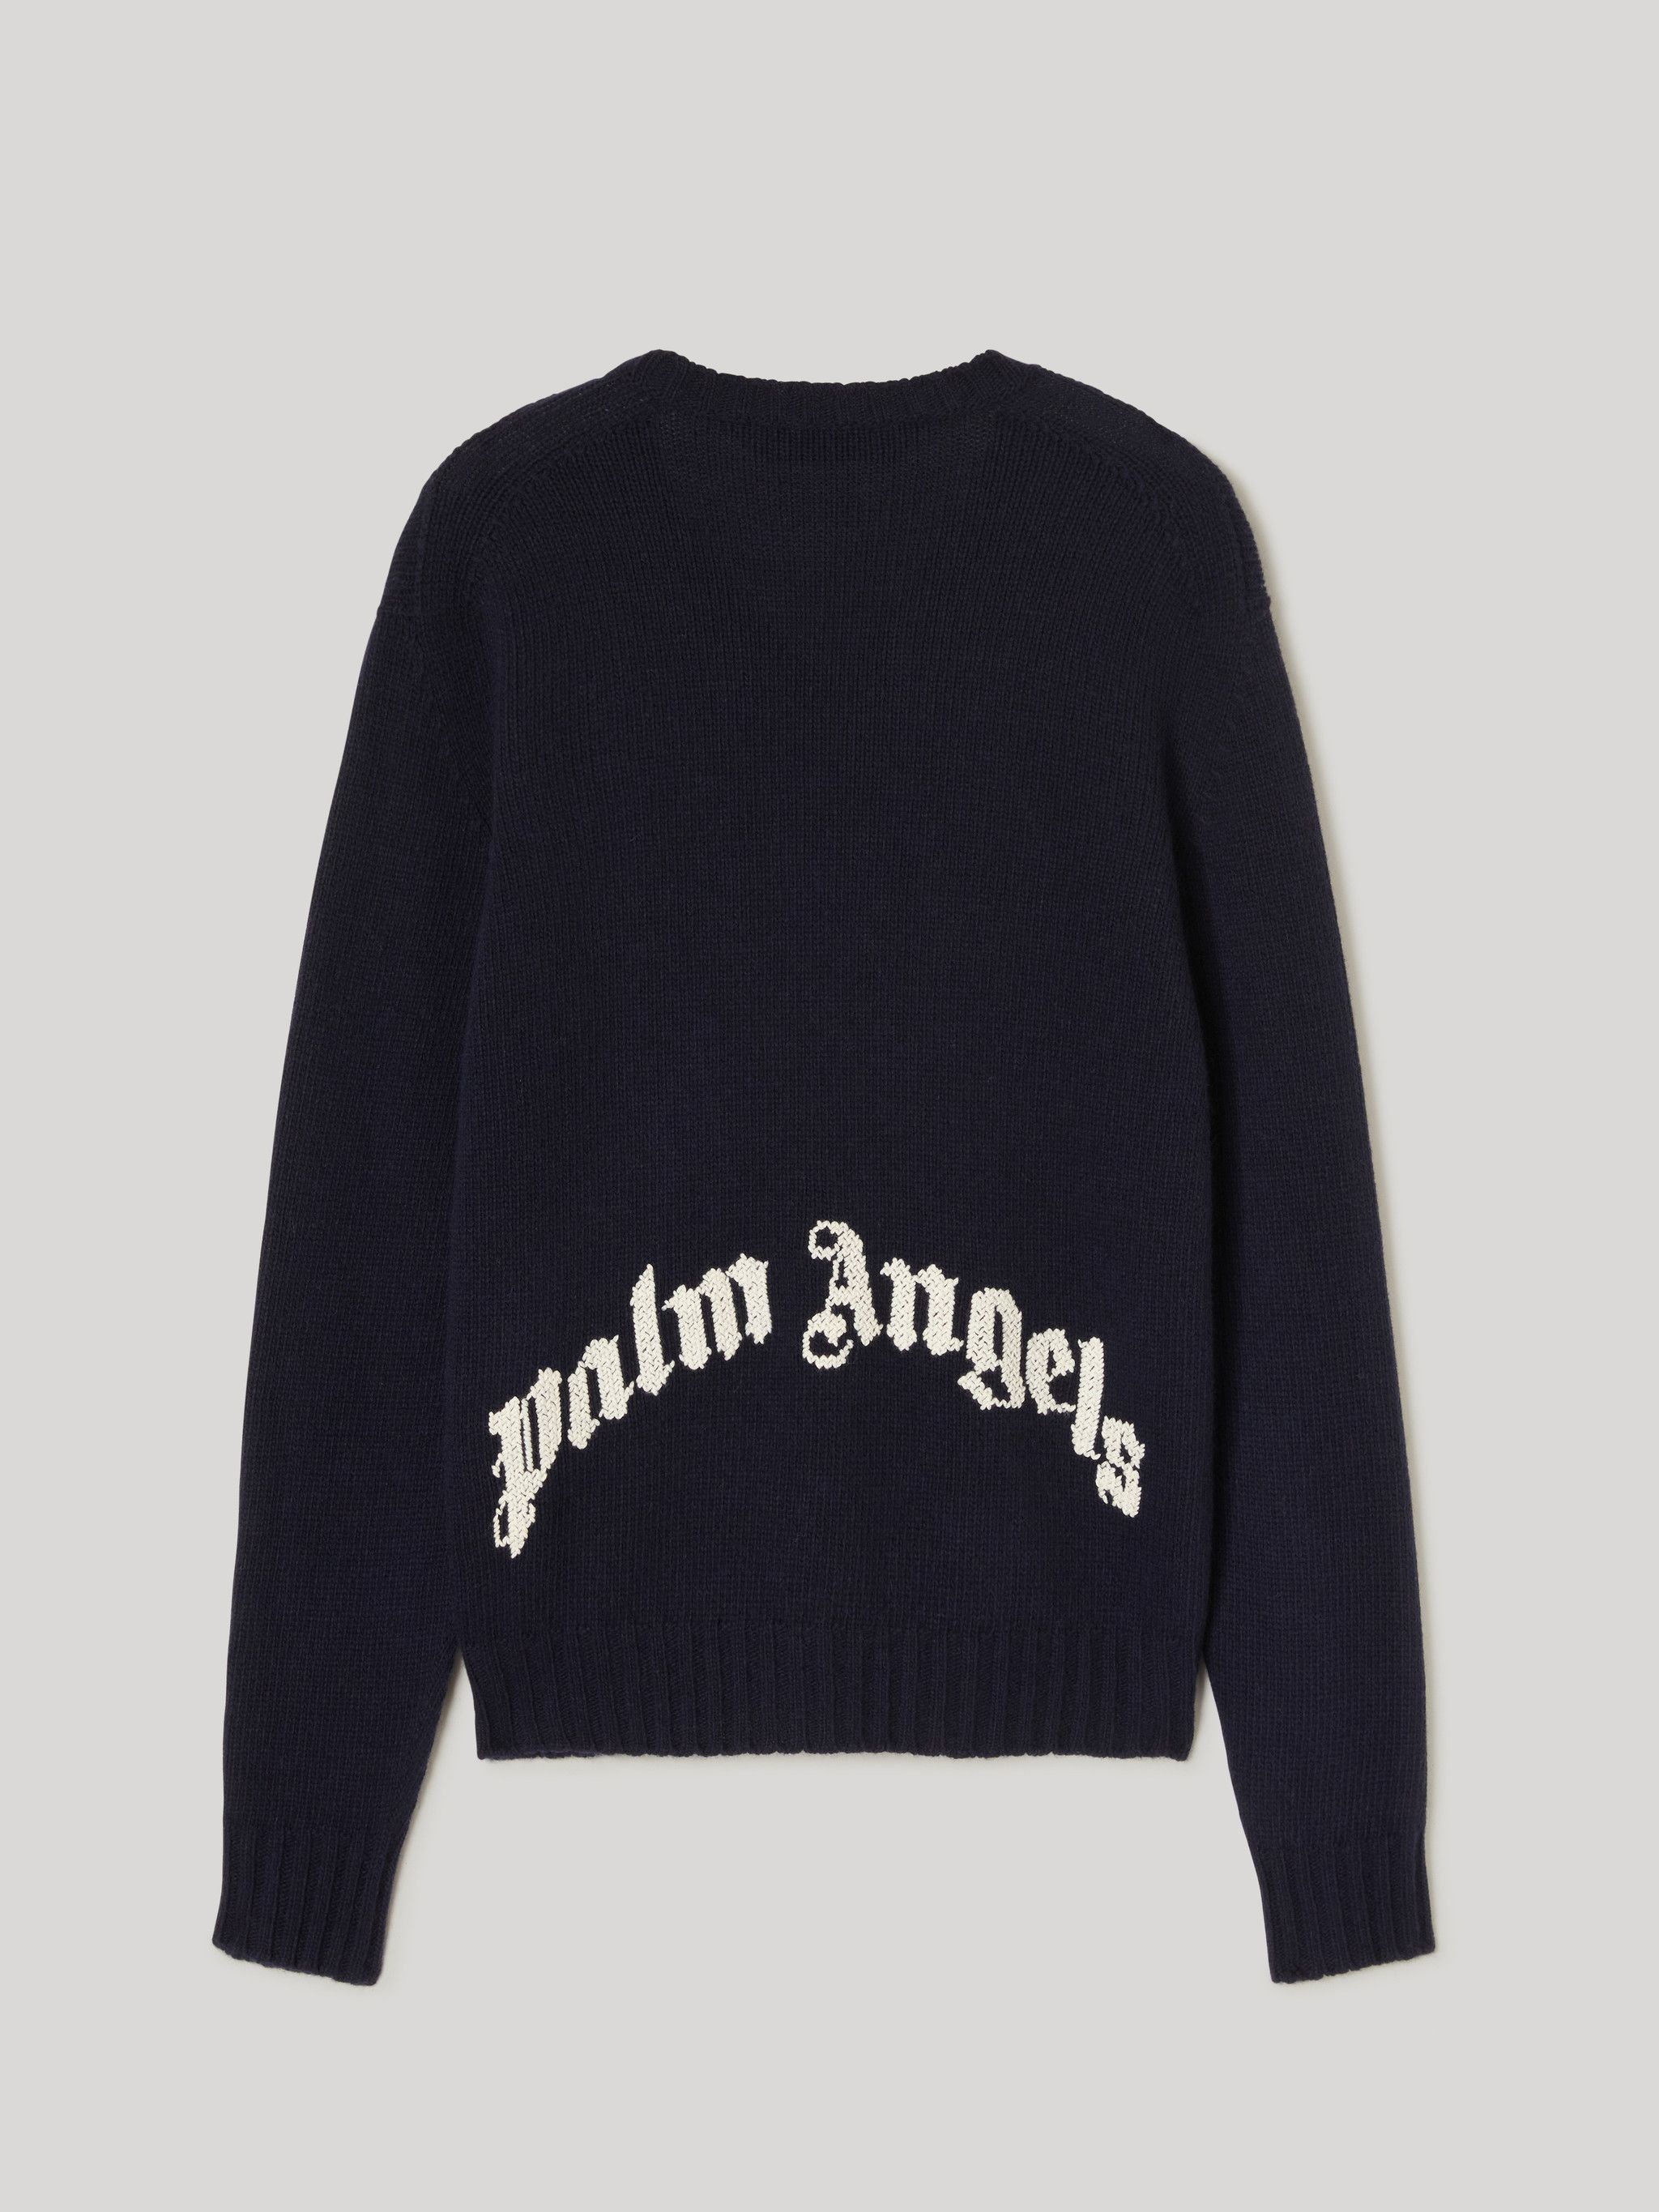 CURVED LOGO SWEATER - 2